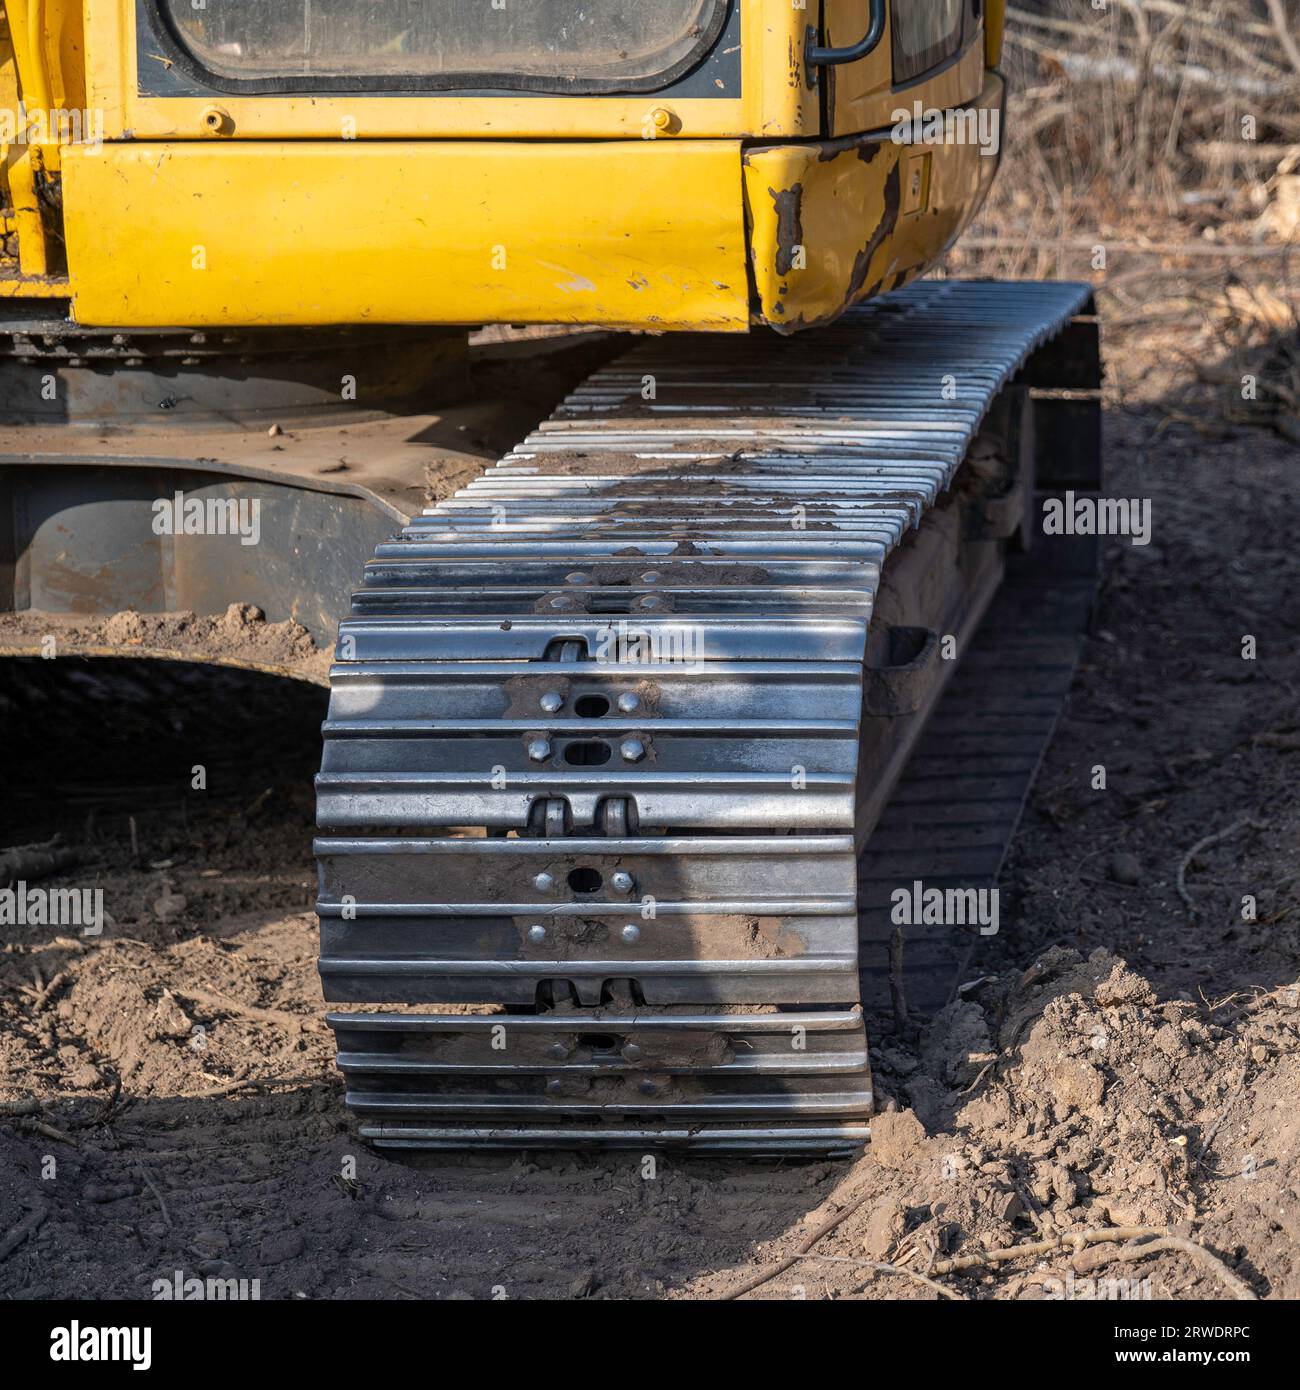 Closeup of an aged and worn steel track on an older used but working excavator. Stock Photo